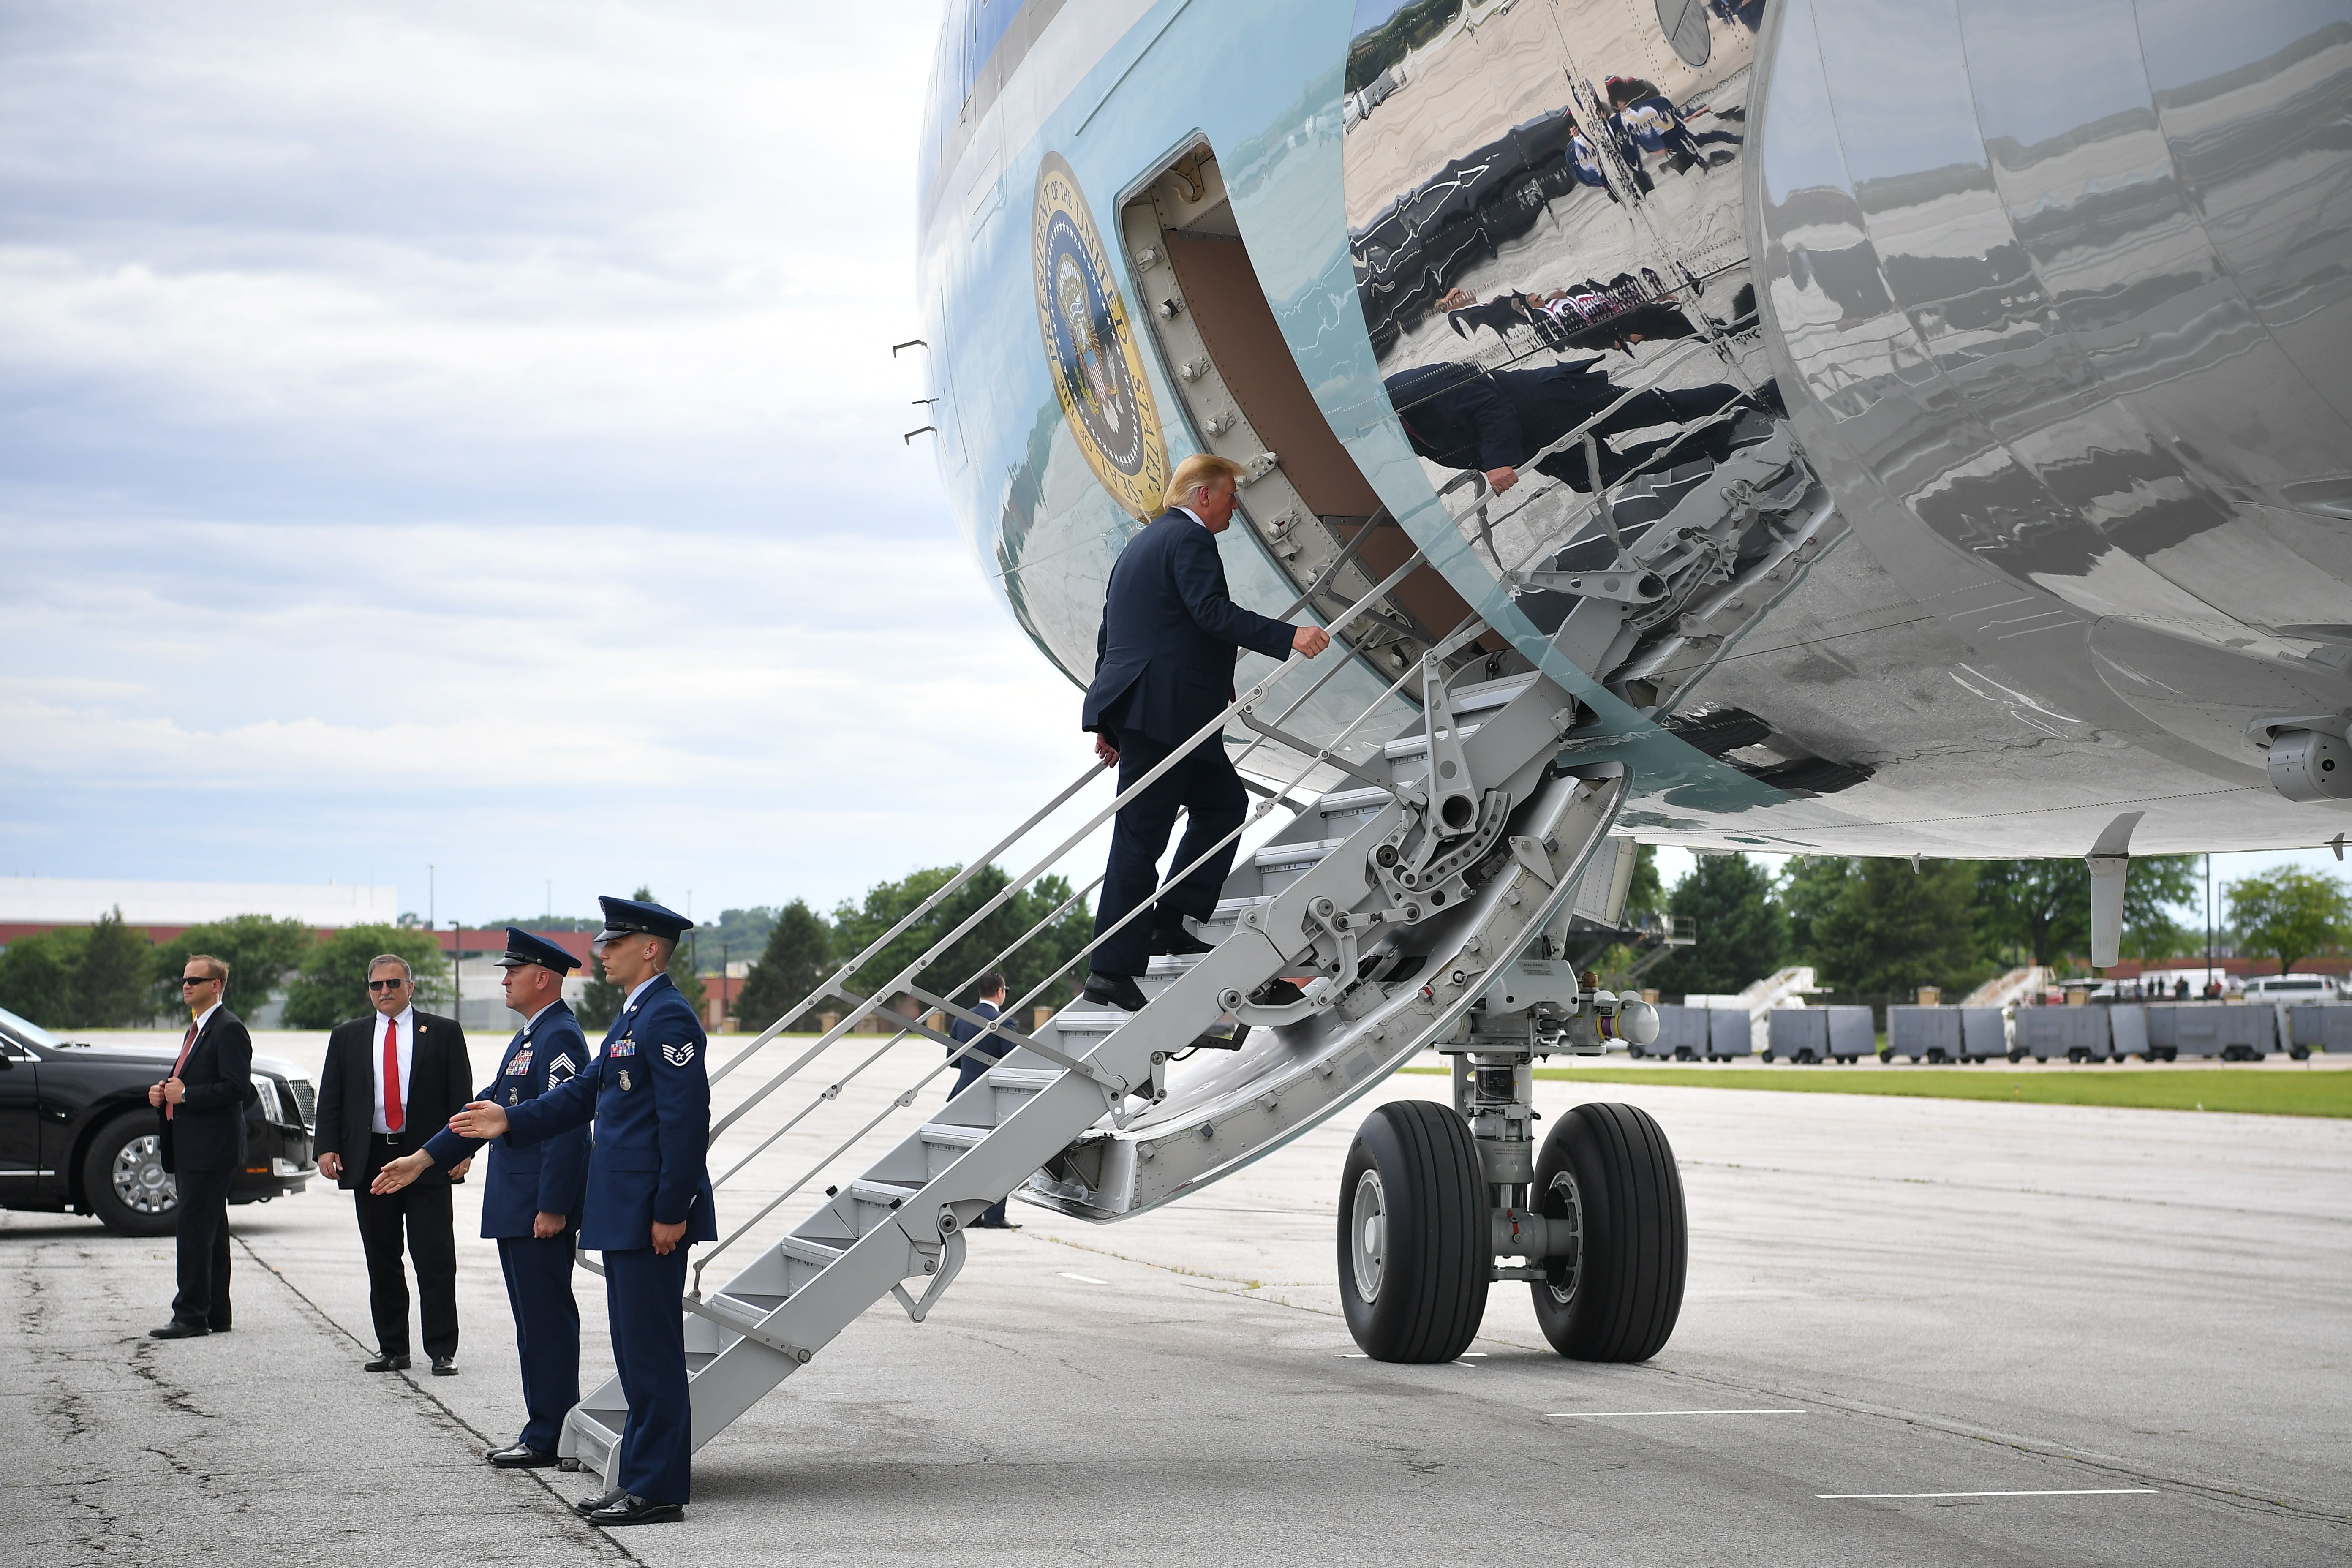 President Trump boarding Air Force One.